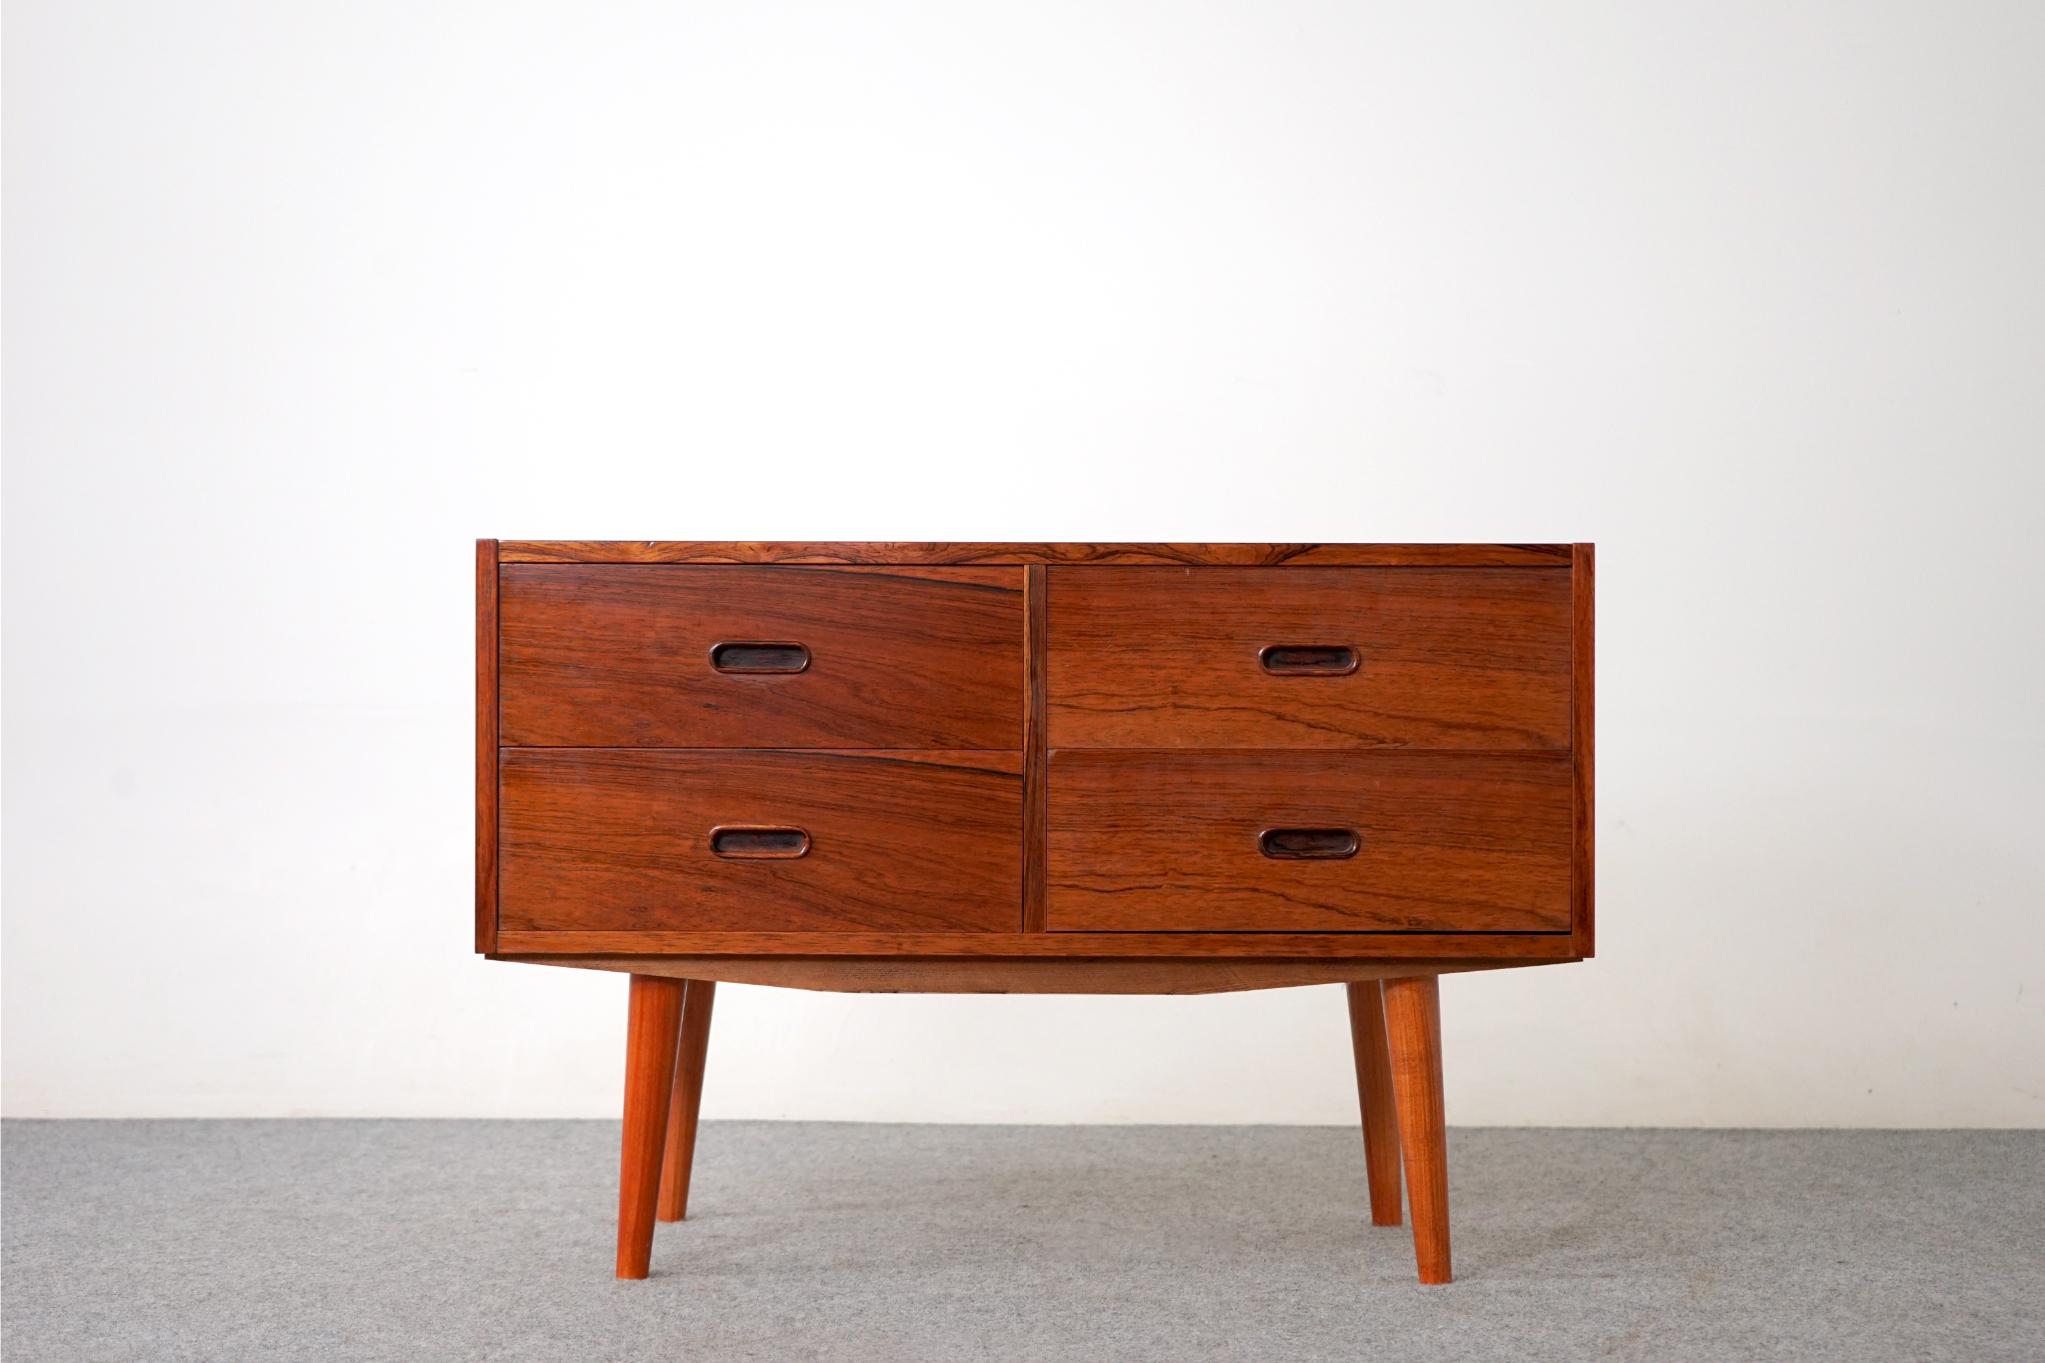 Rosewood Scandinavian dresser circa 1960's. Integrated, horizontal drawer pulls make opening and closing the drawers a breeze. This four drawer dresser features solid wood edging with stunning veneer on all drawer faces and dovetail construction.